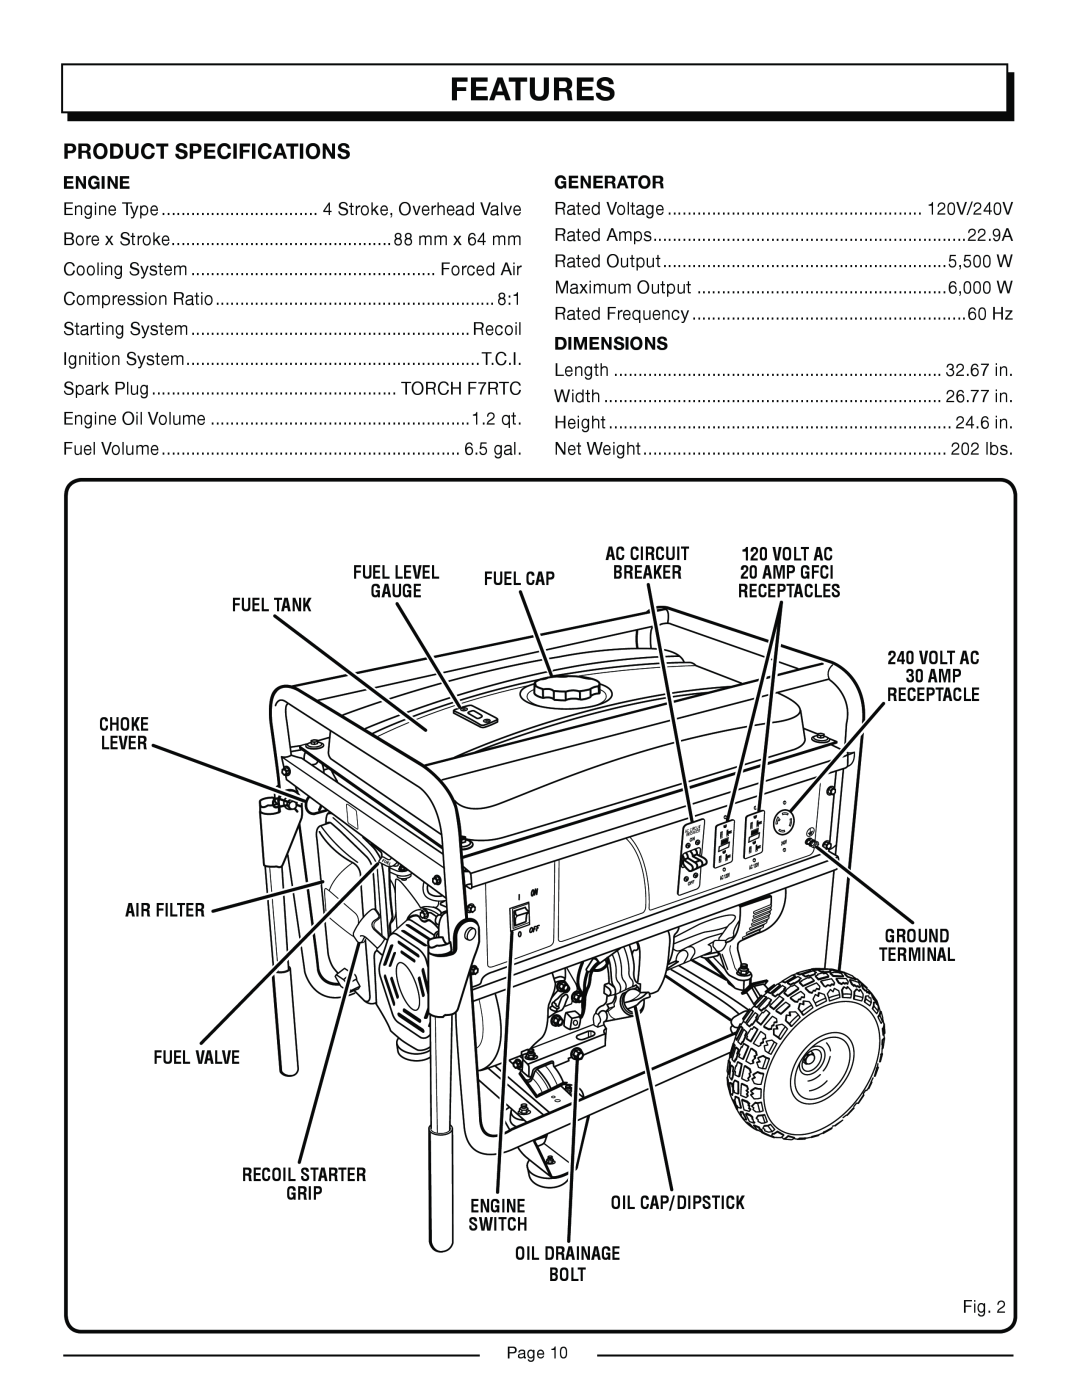 Homelite HG6000 manual Features, Product Specifications 